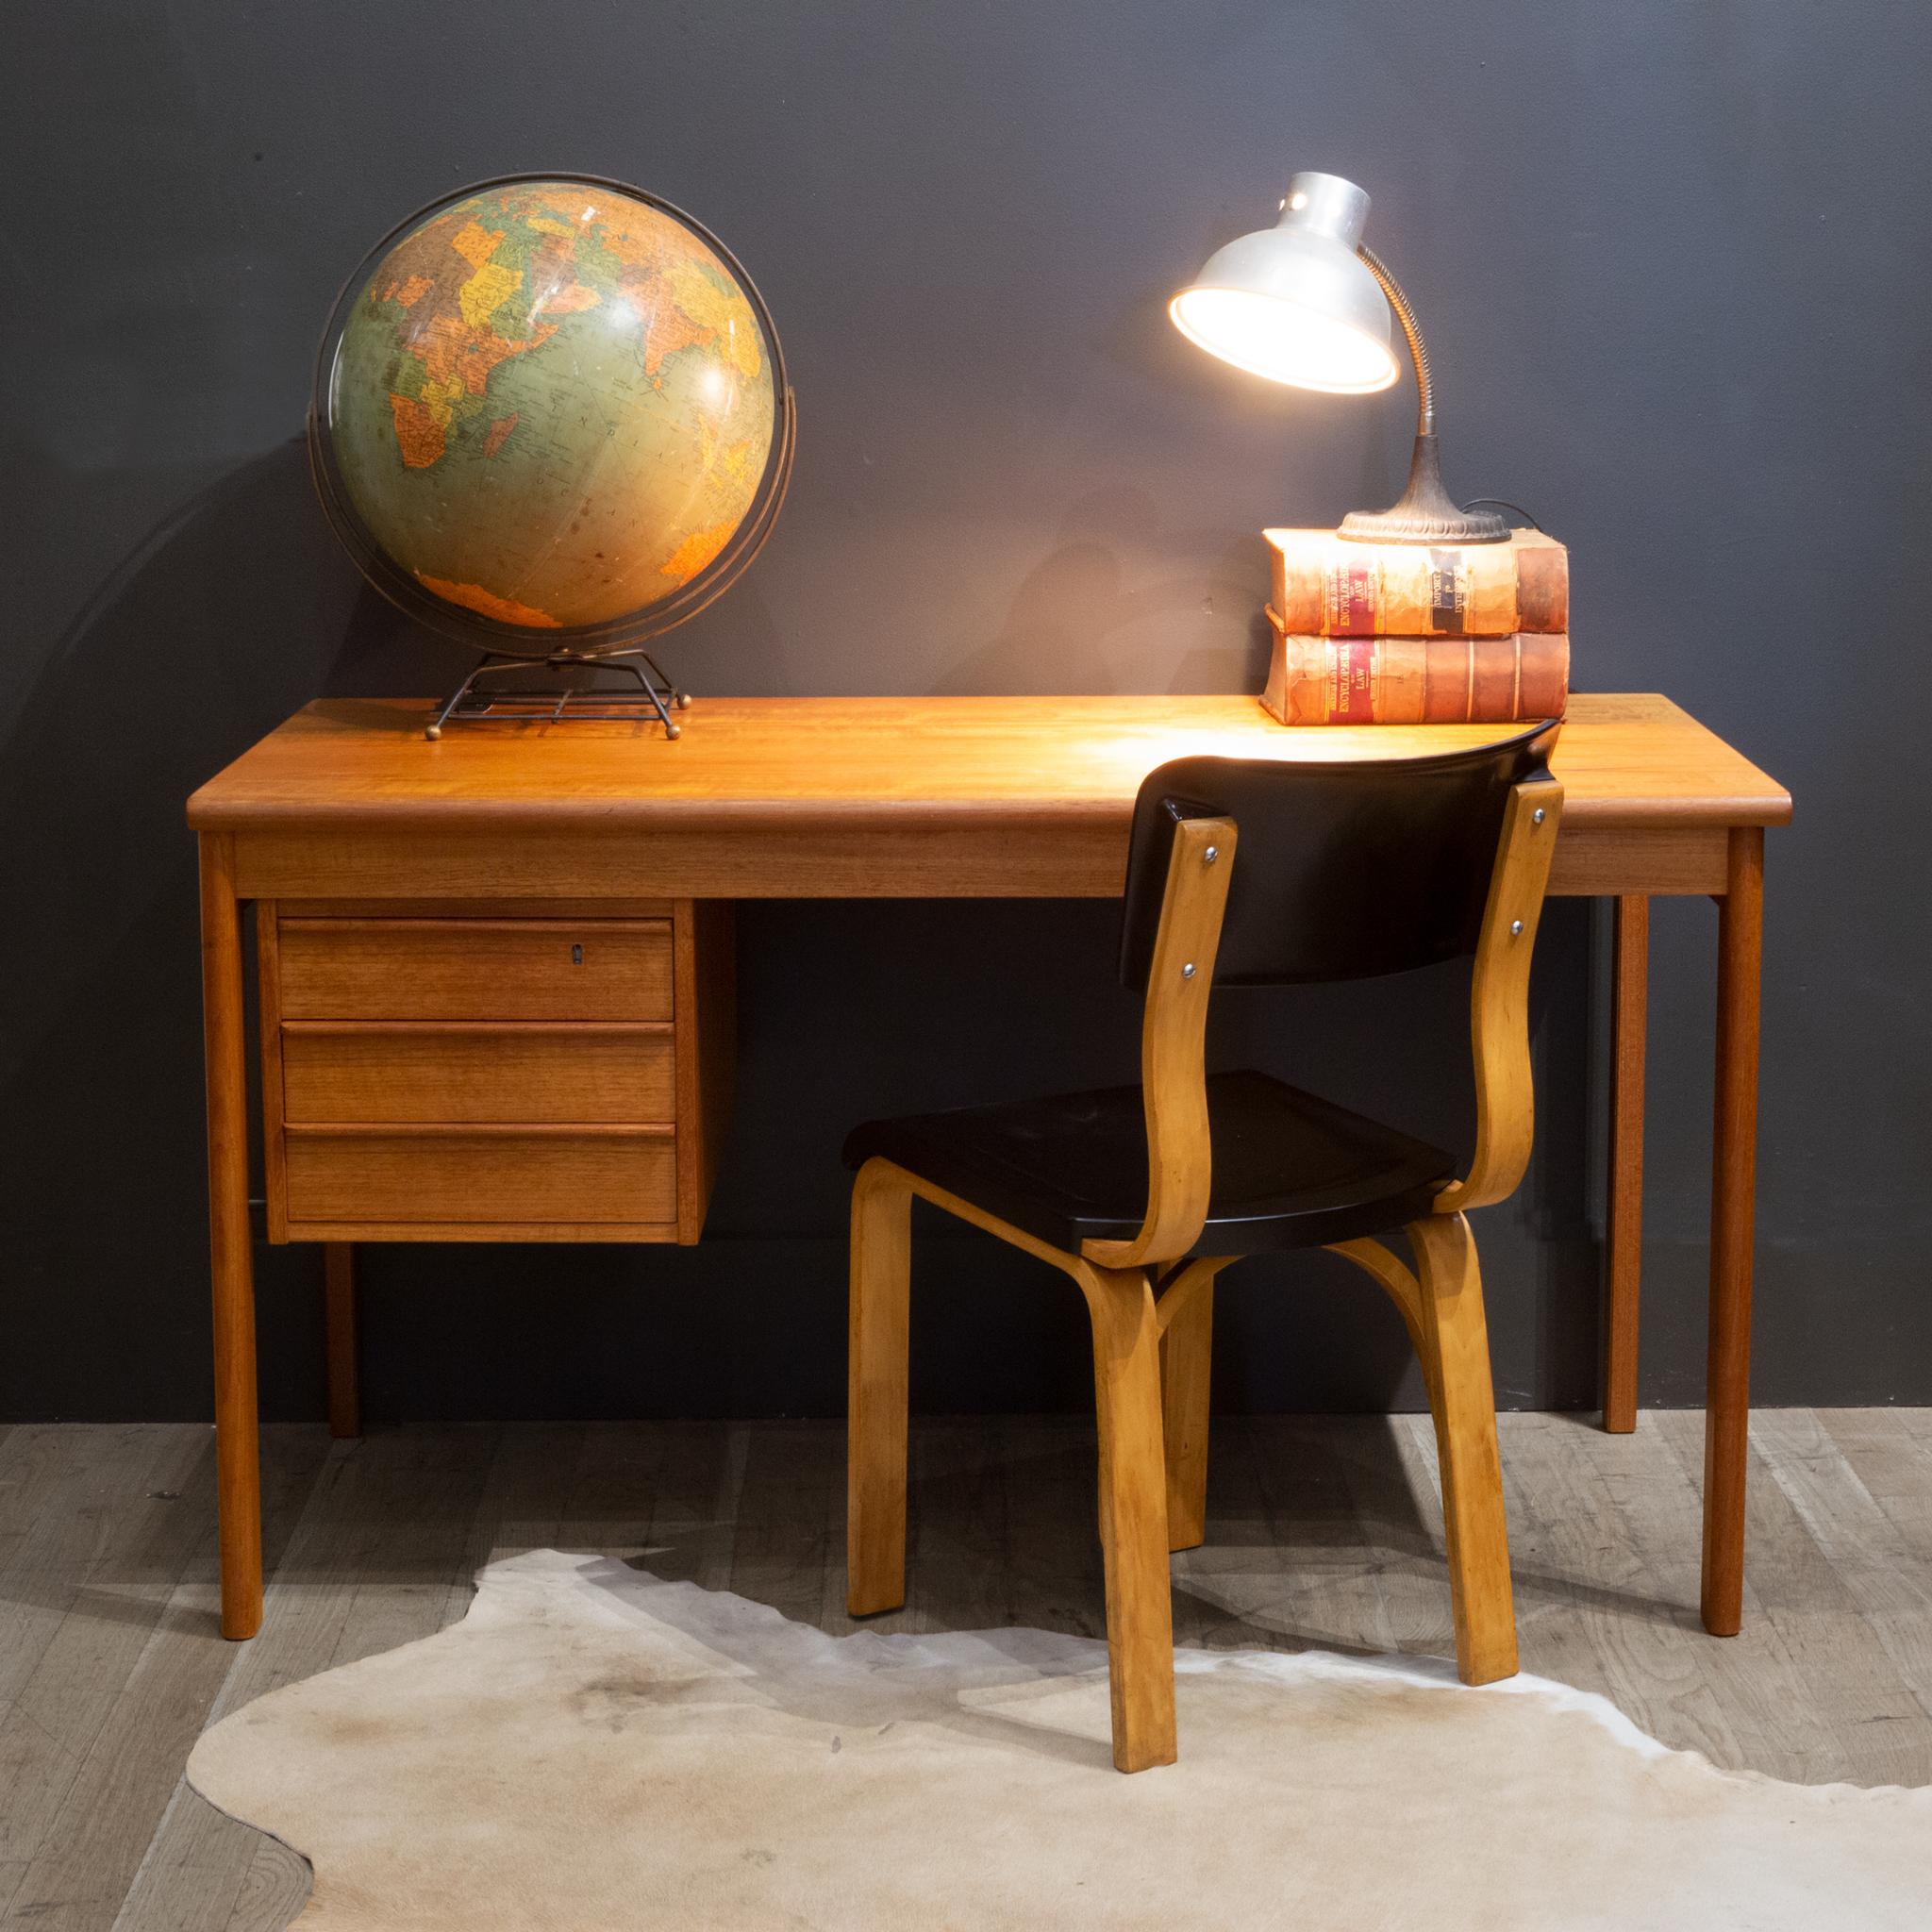 Aabout

Vintage Mid-Century Modern Danish teak Peter Lovig Nielson Dansk desk designed by Jens Quistgaard. This Danish design desk has 3 drawers on the lower left. The top teak desk surface slides to the left and right to reveal a hidden storage